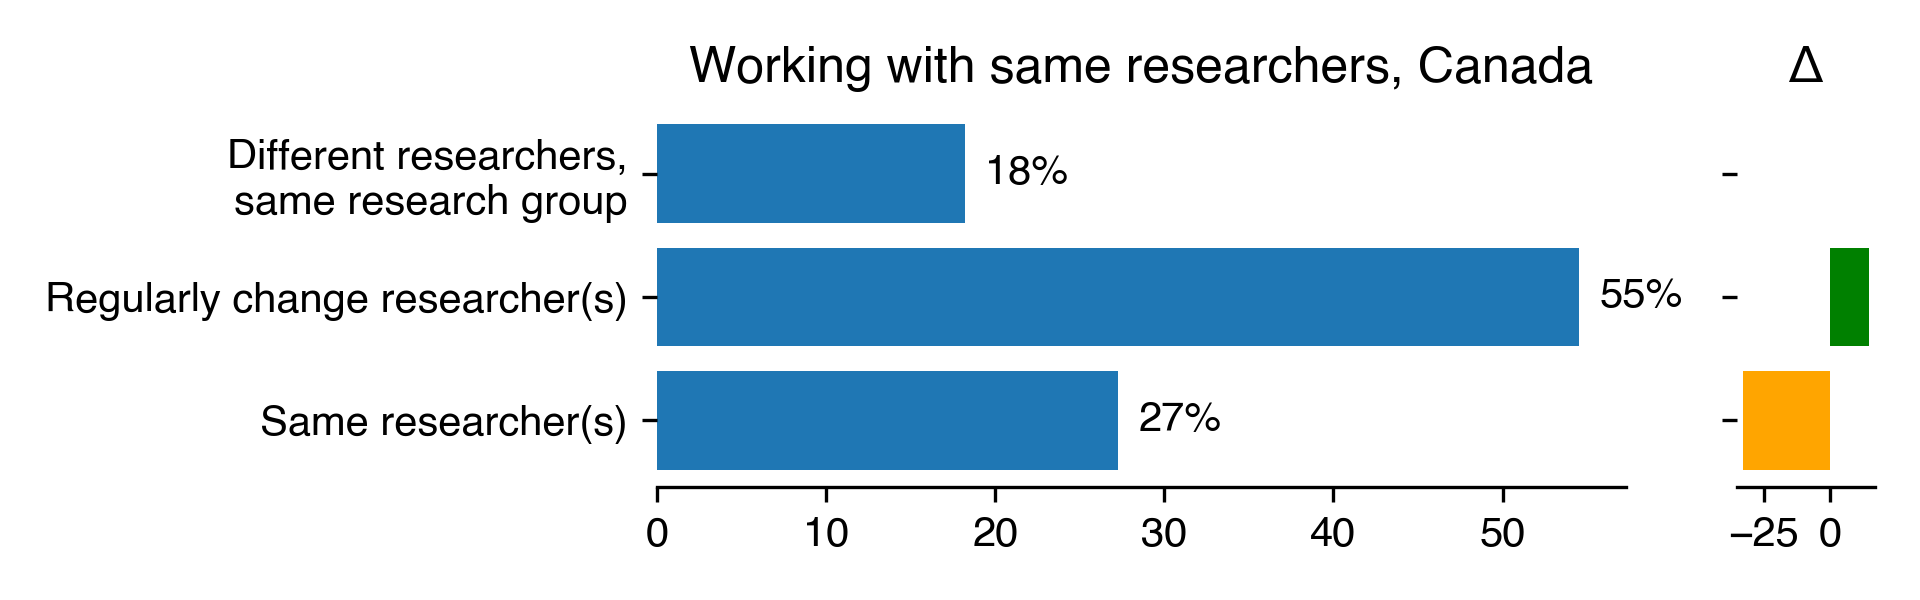 working-with-same-researchers